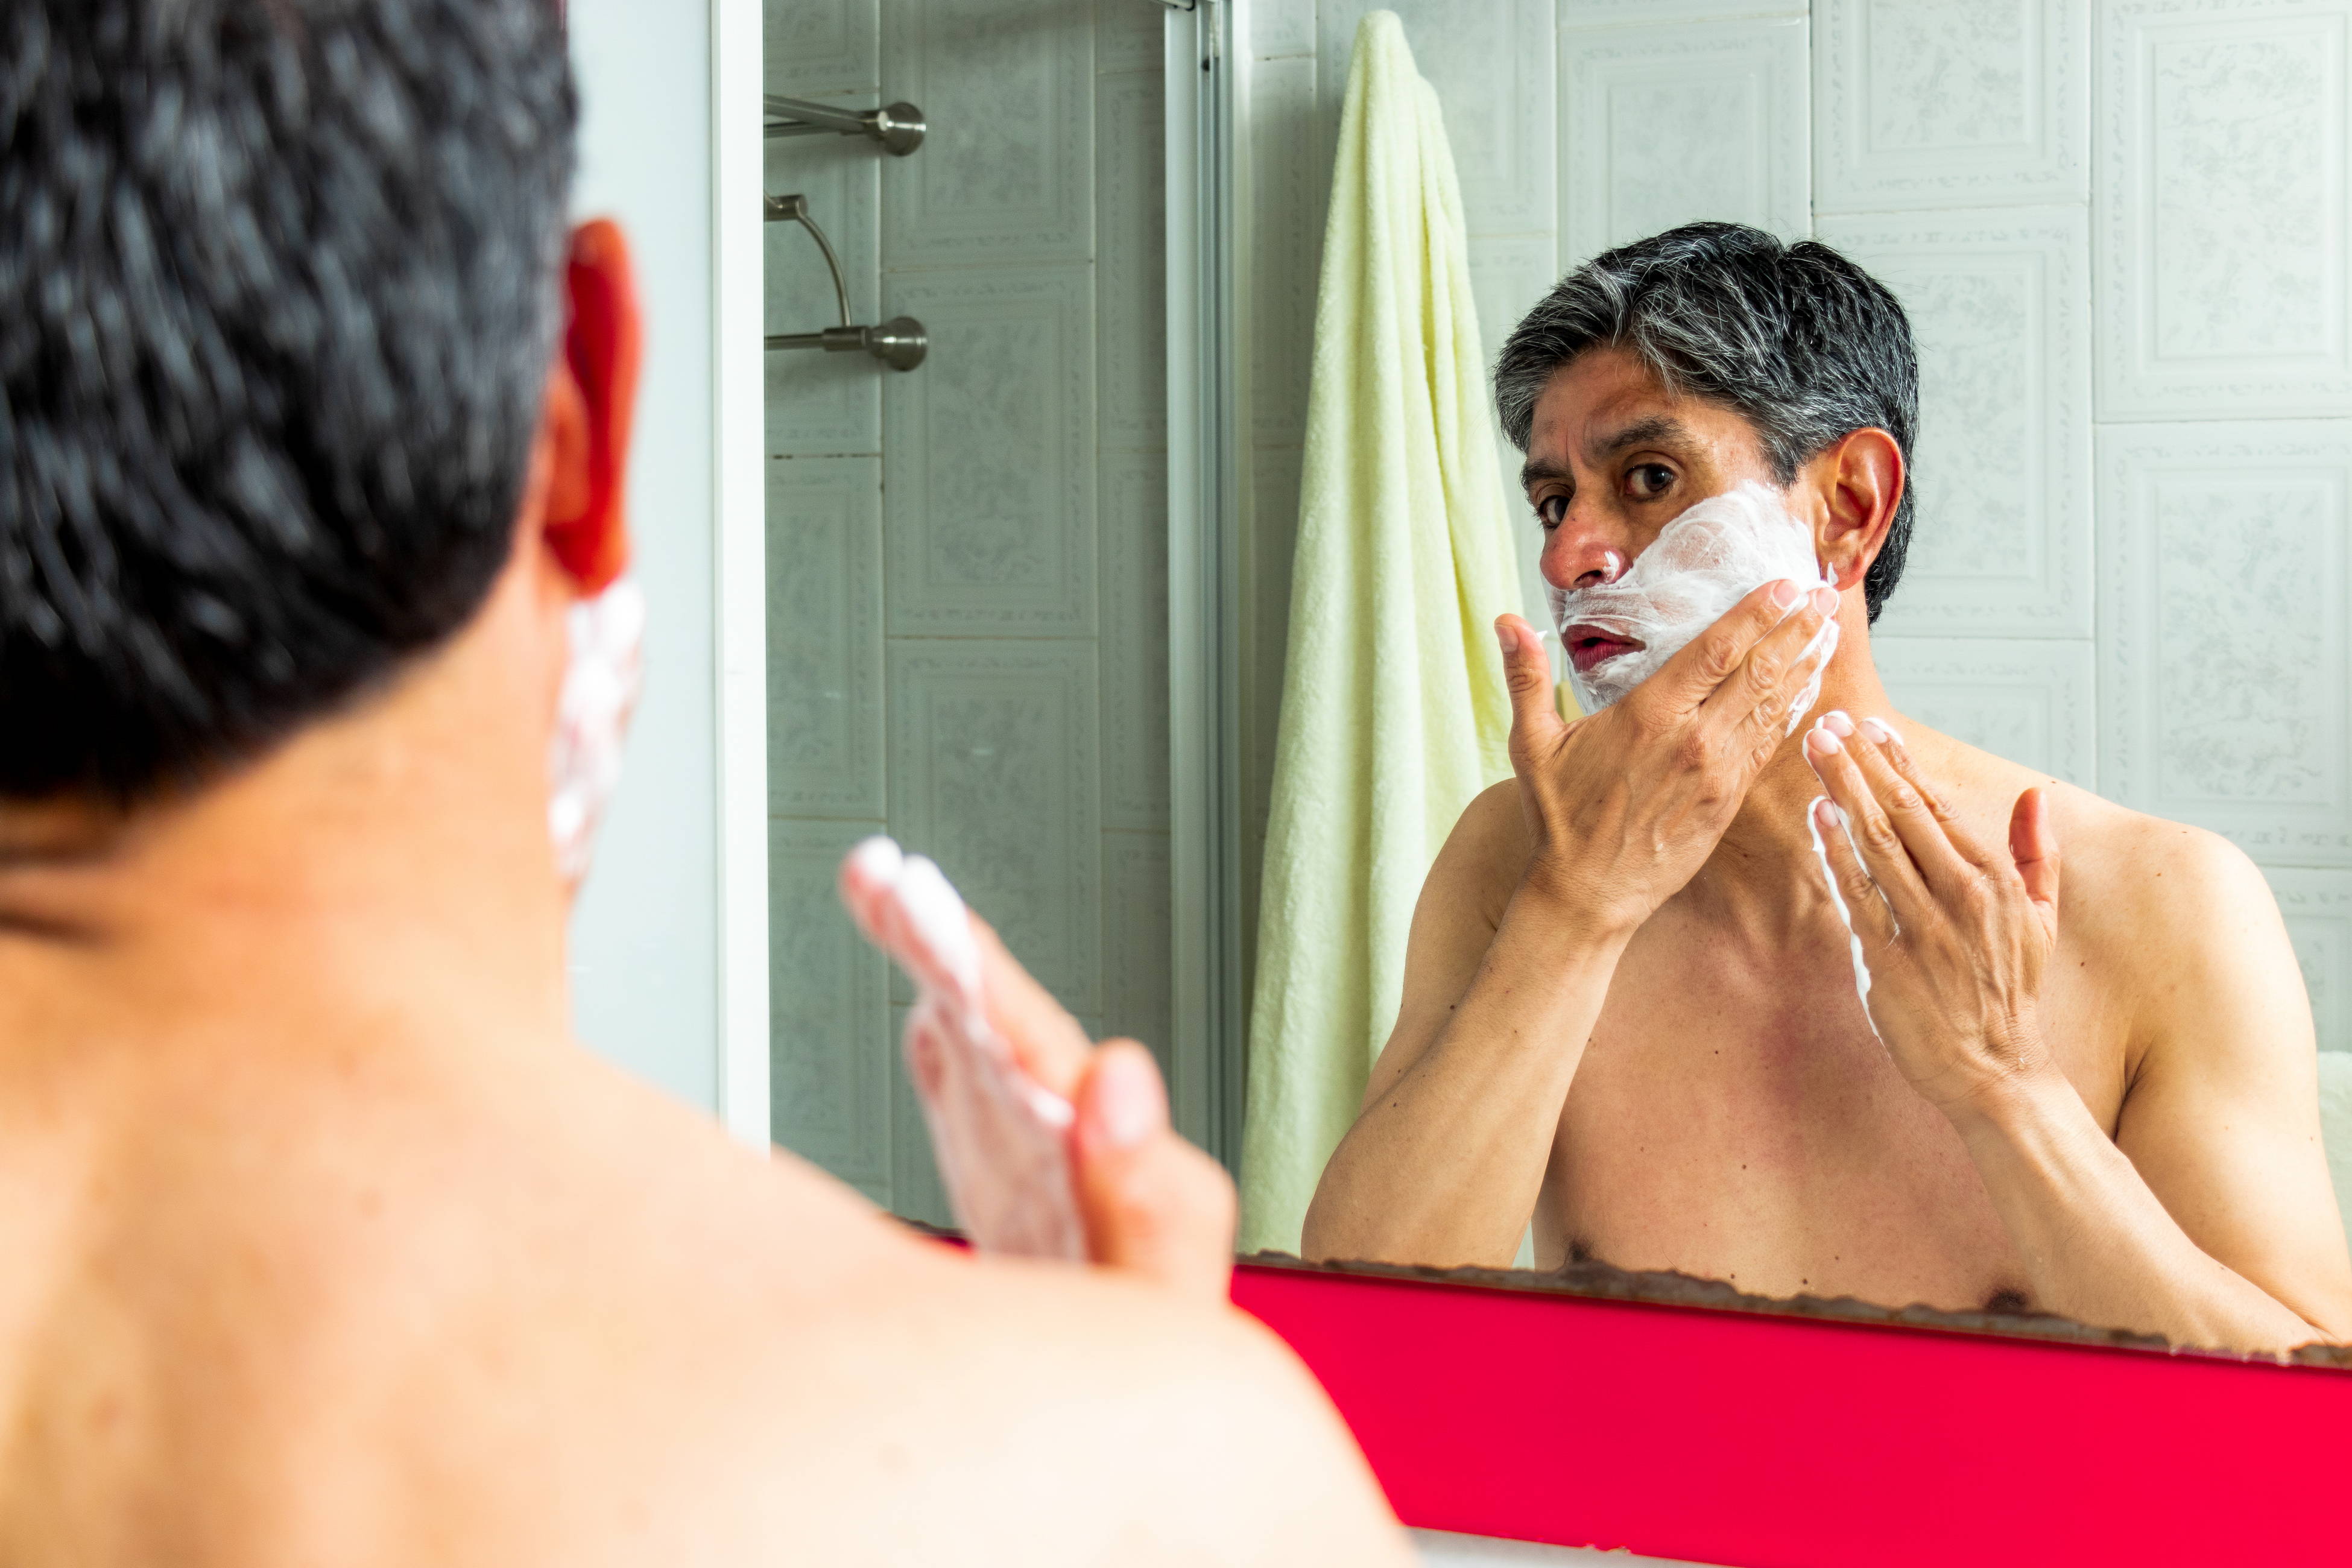 A man tries out his new shaving kit in front of the bathroom mirror.